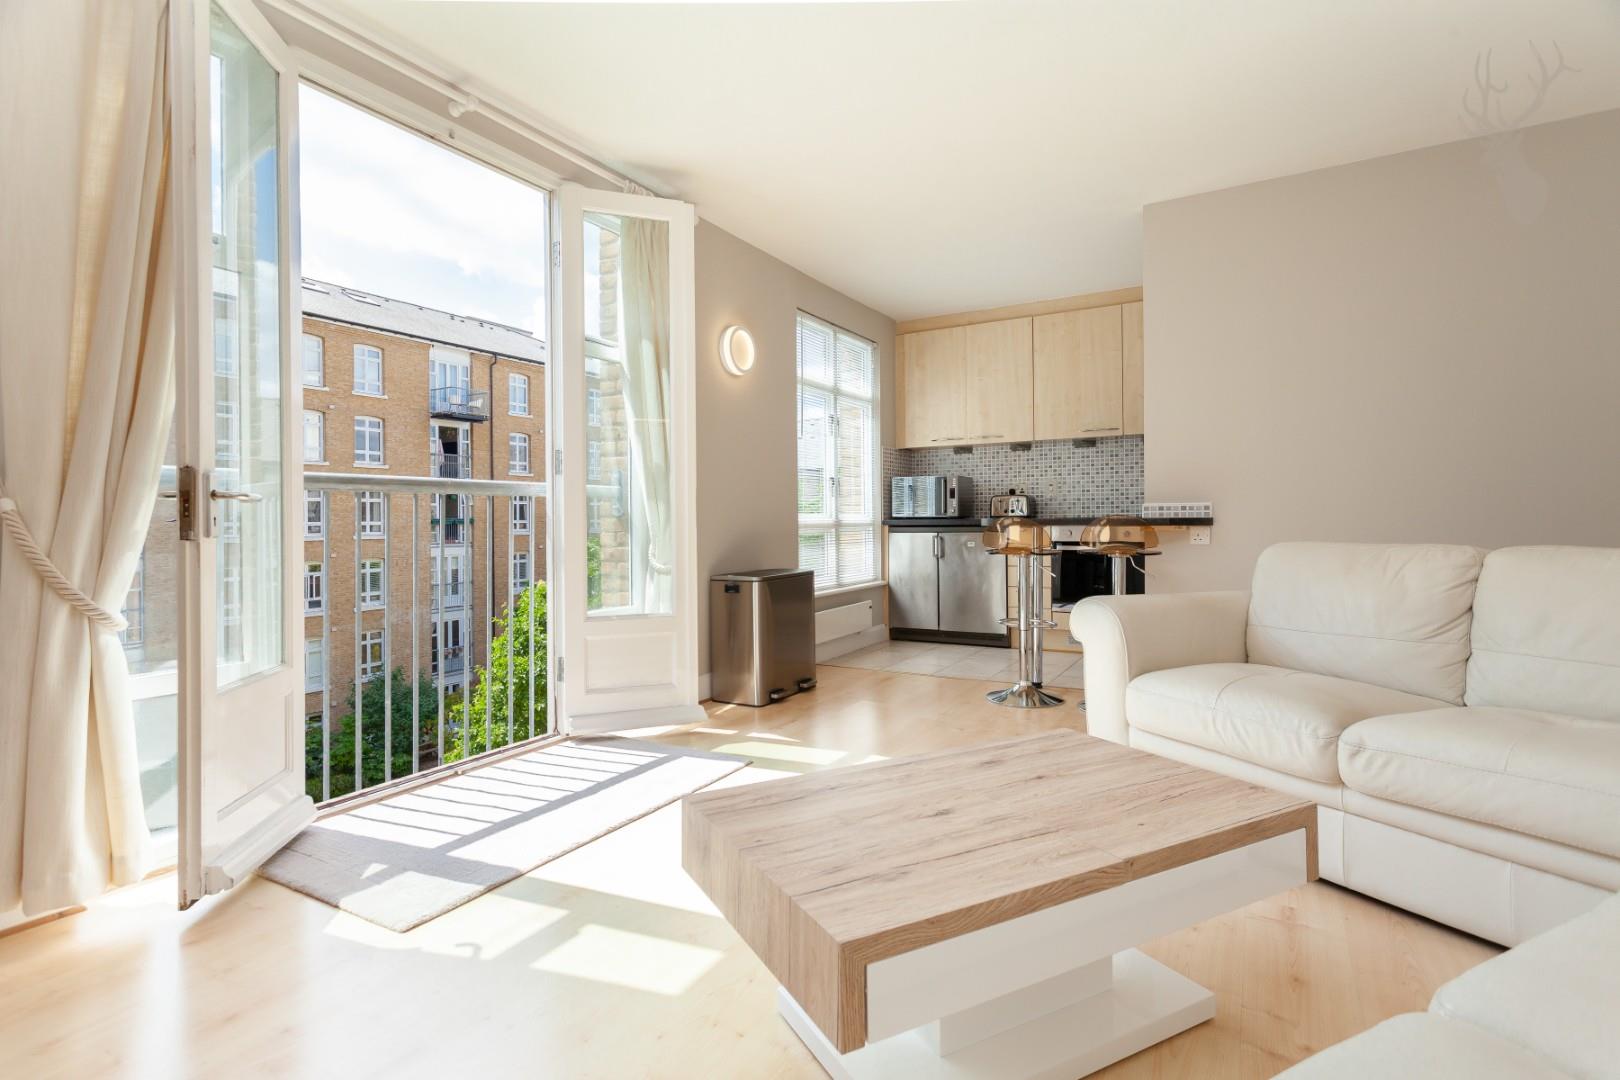 Similar Property: Apartment in Bow Quarter, Bow